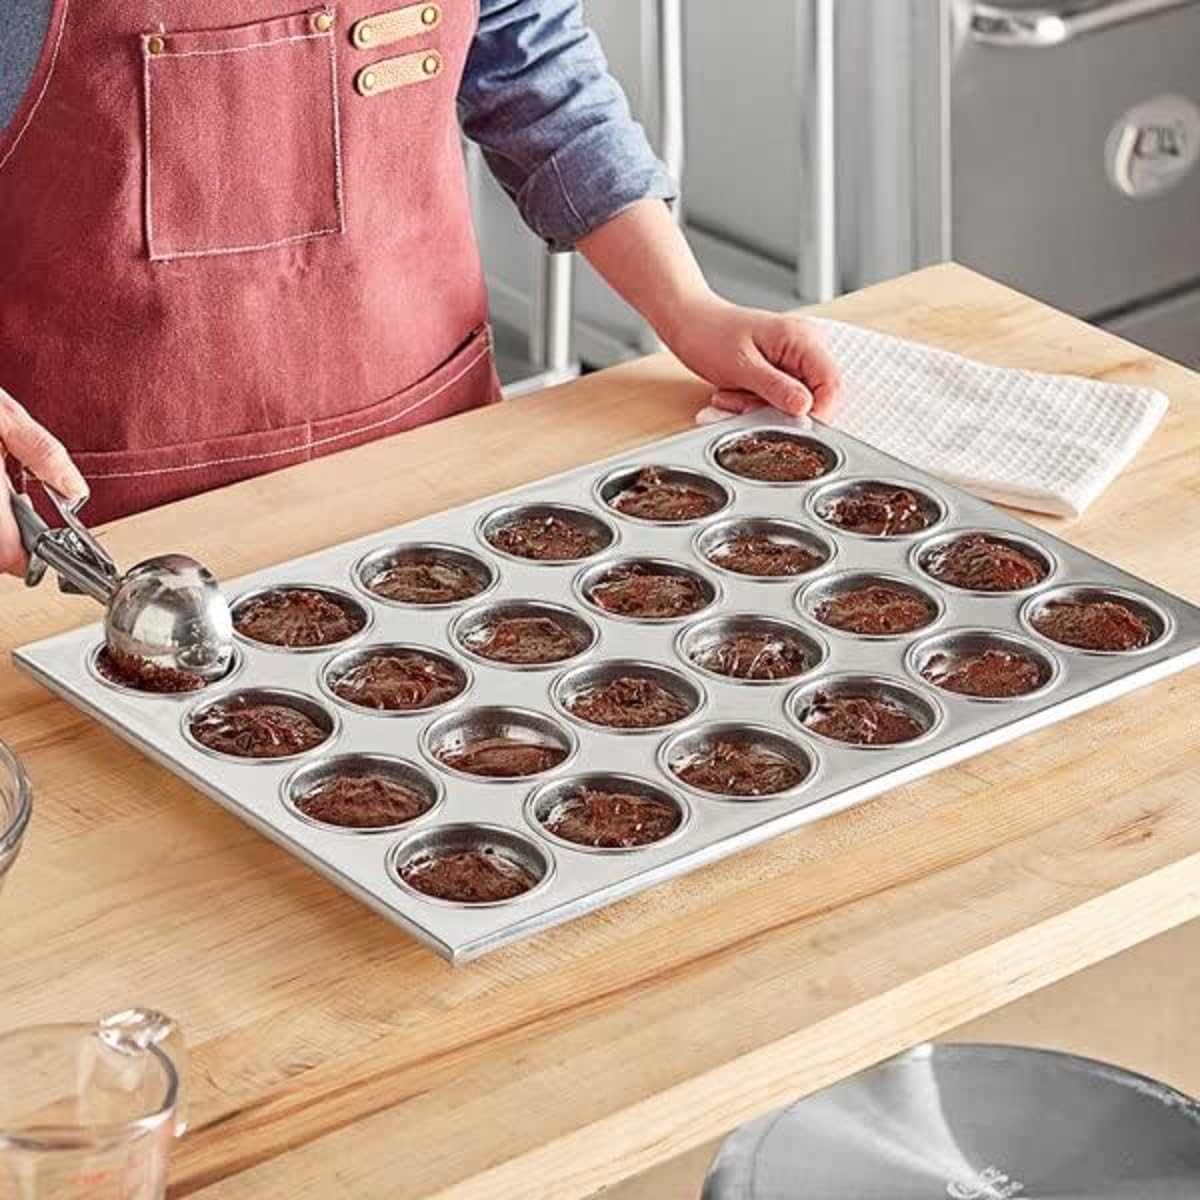 TrueCraftware 24 Cup Aluminum Muffin Pan 3-1/2 oz each cup- Cupcake Baking Pan Bakeware Cupcake Pan Great for Making Muffin Cakes Tart Bread Shortcakes Brownies for Home and Kitchen